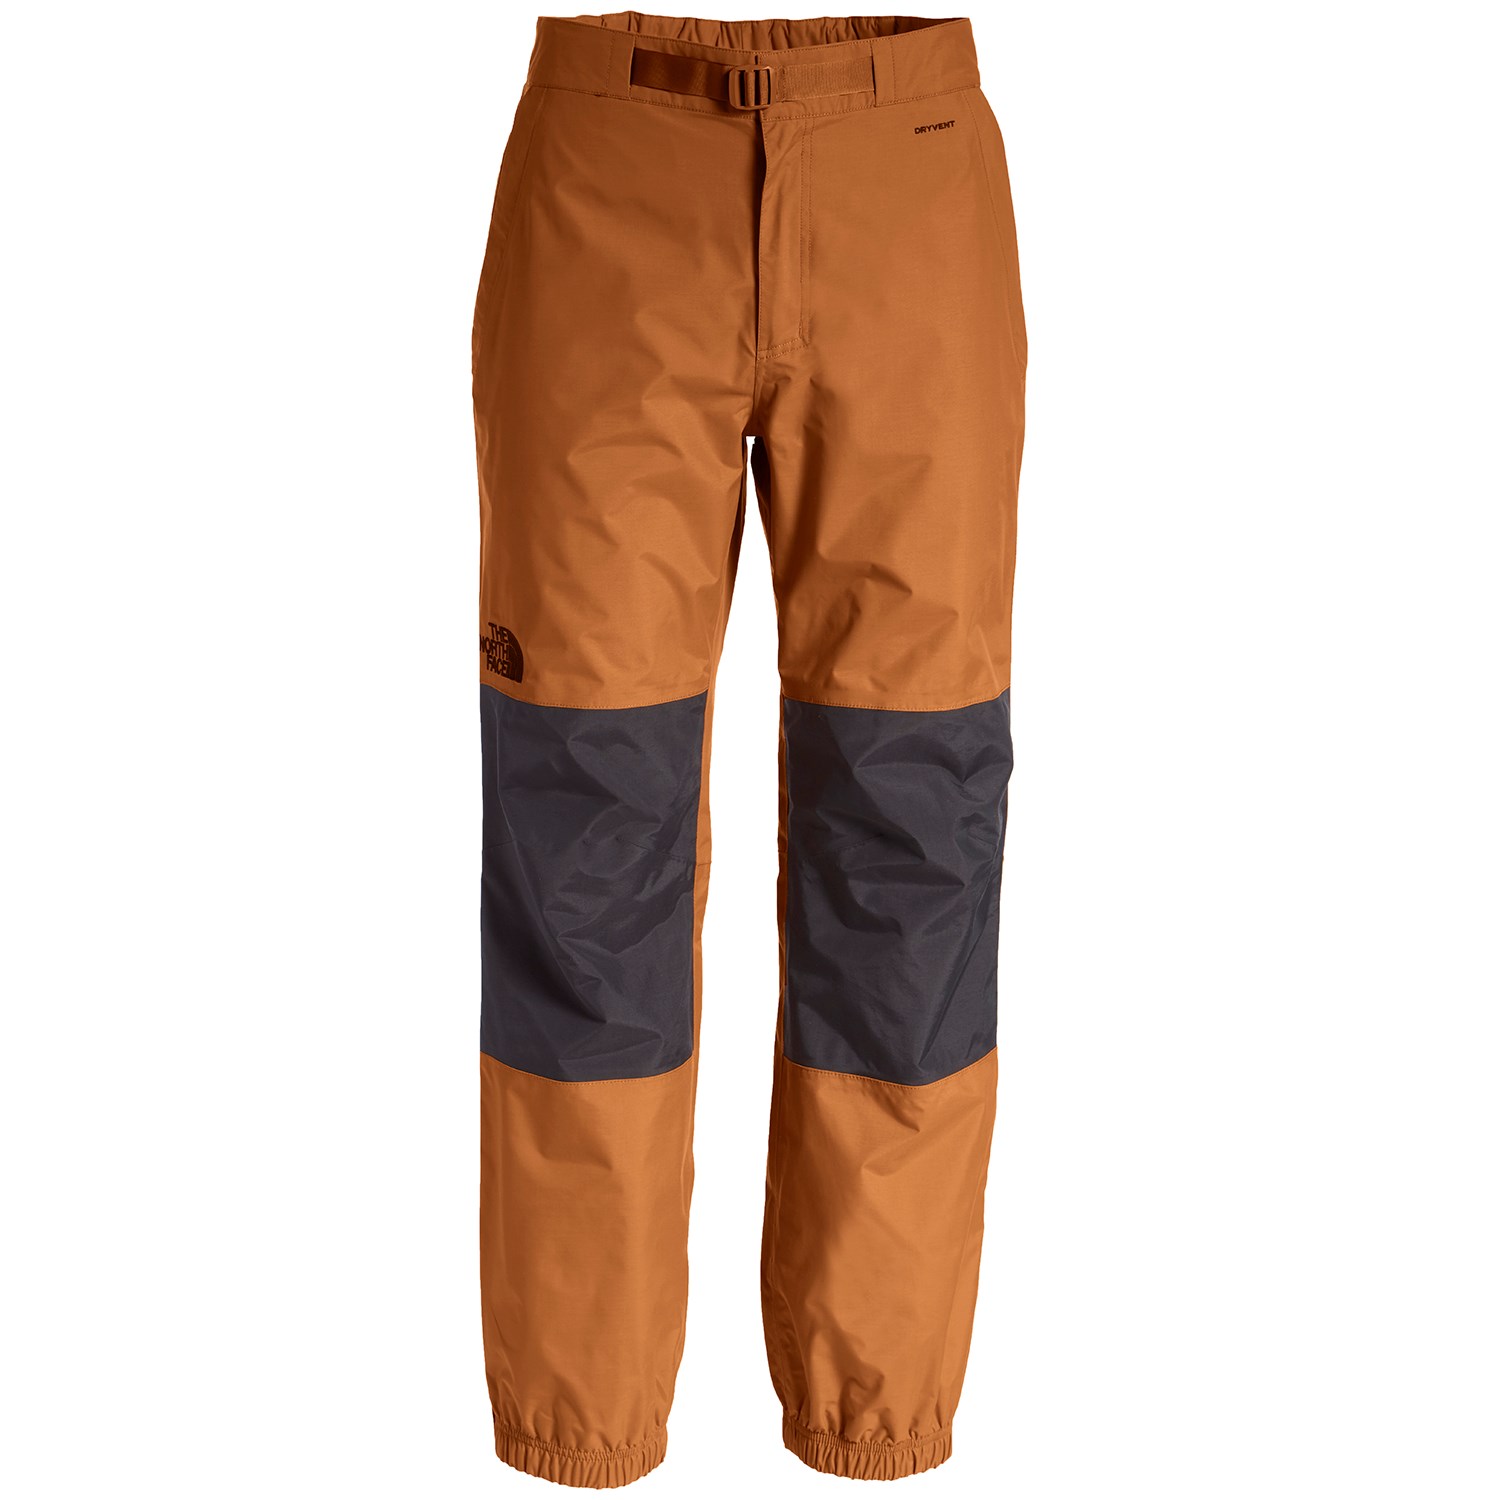 the north face pant